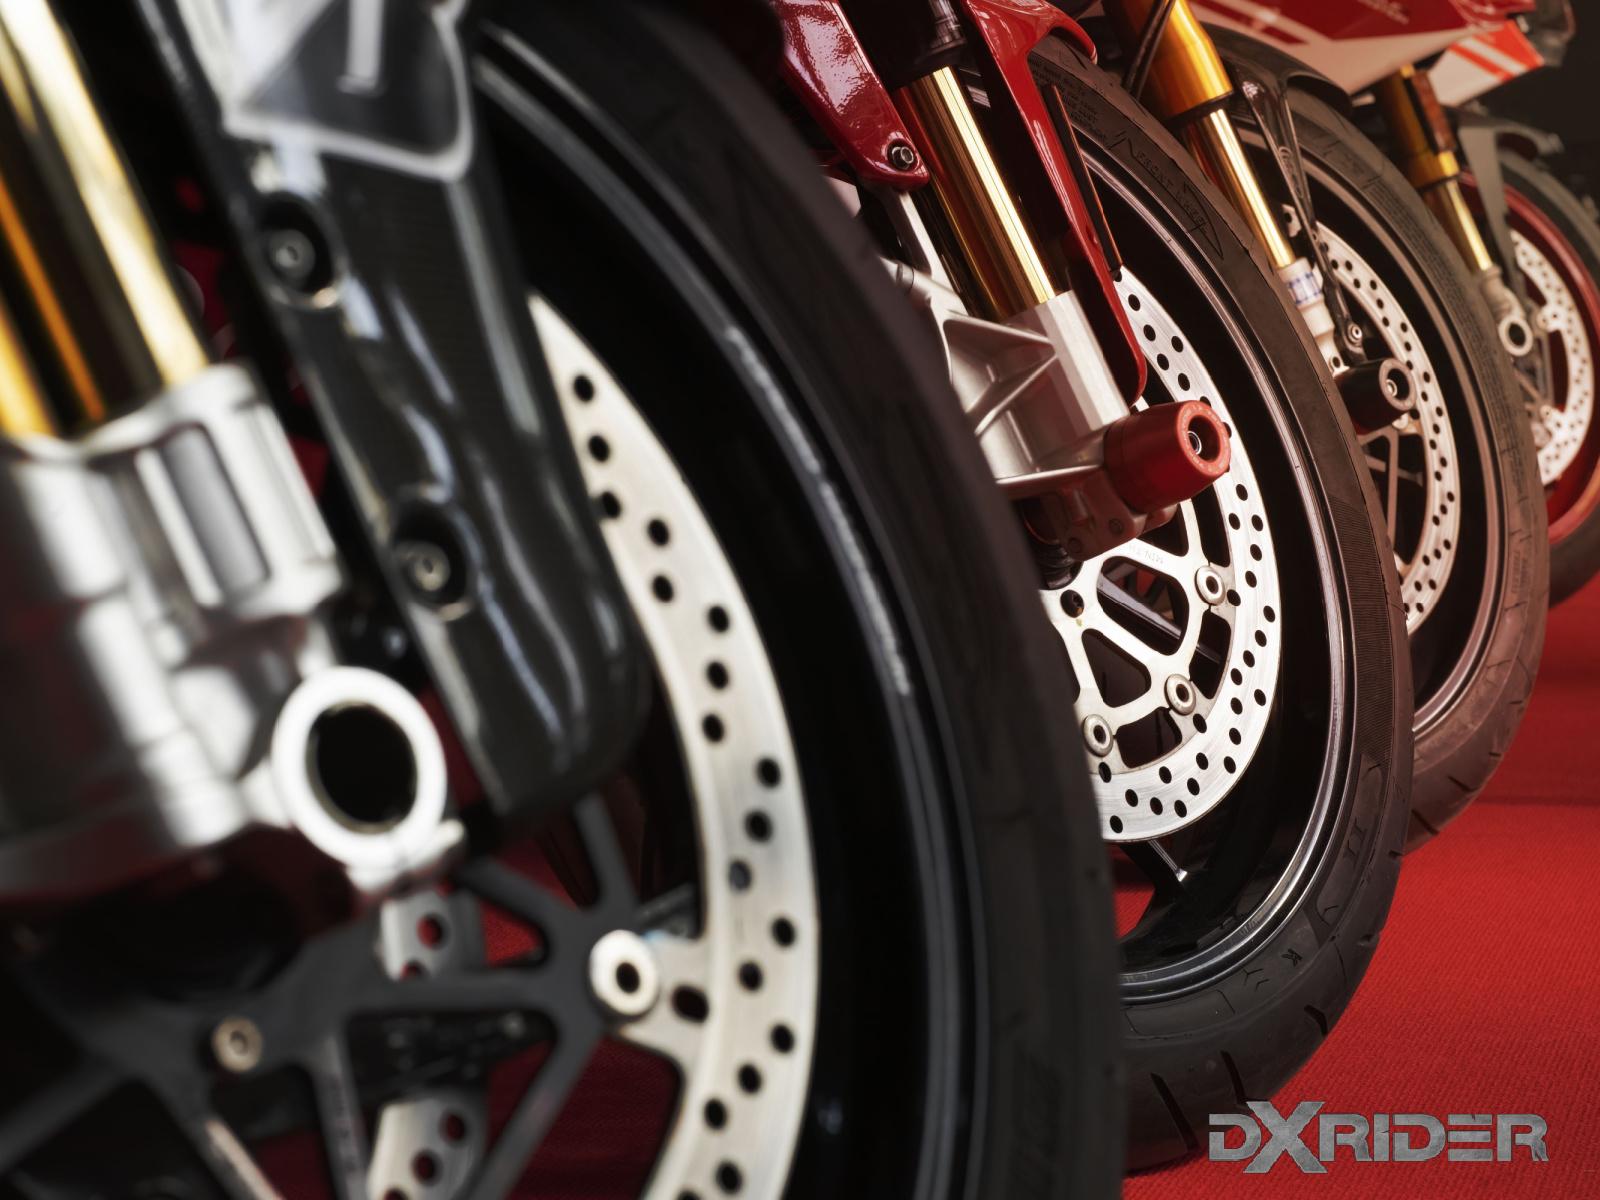 Look to DXRIDER as Your Local Gig Harbor Motorsport Authority